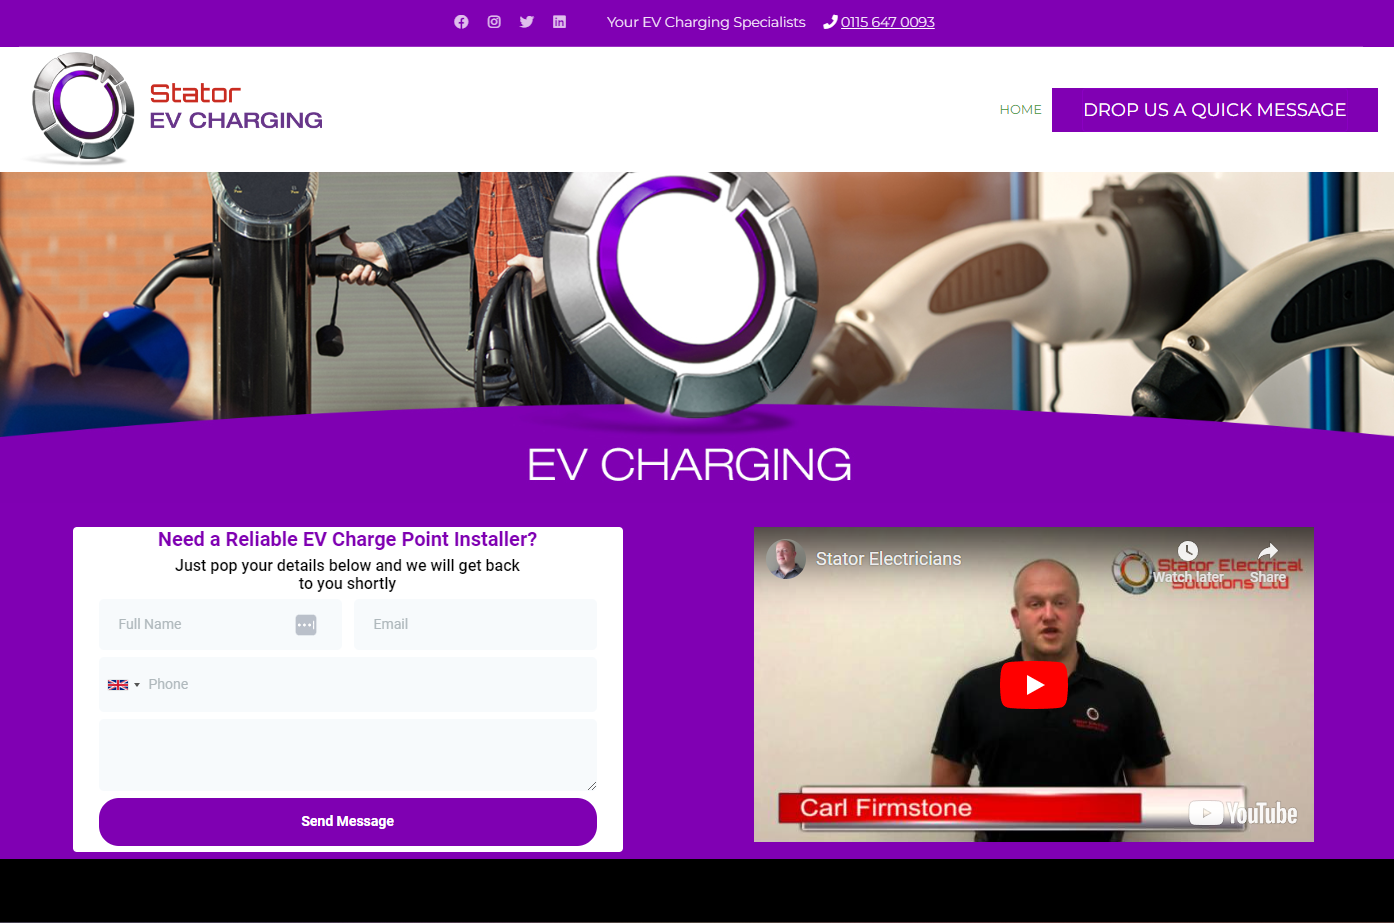 EV Car Charger installer in Nottingham, Derby and Mansfield